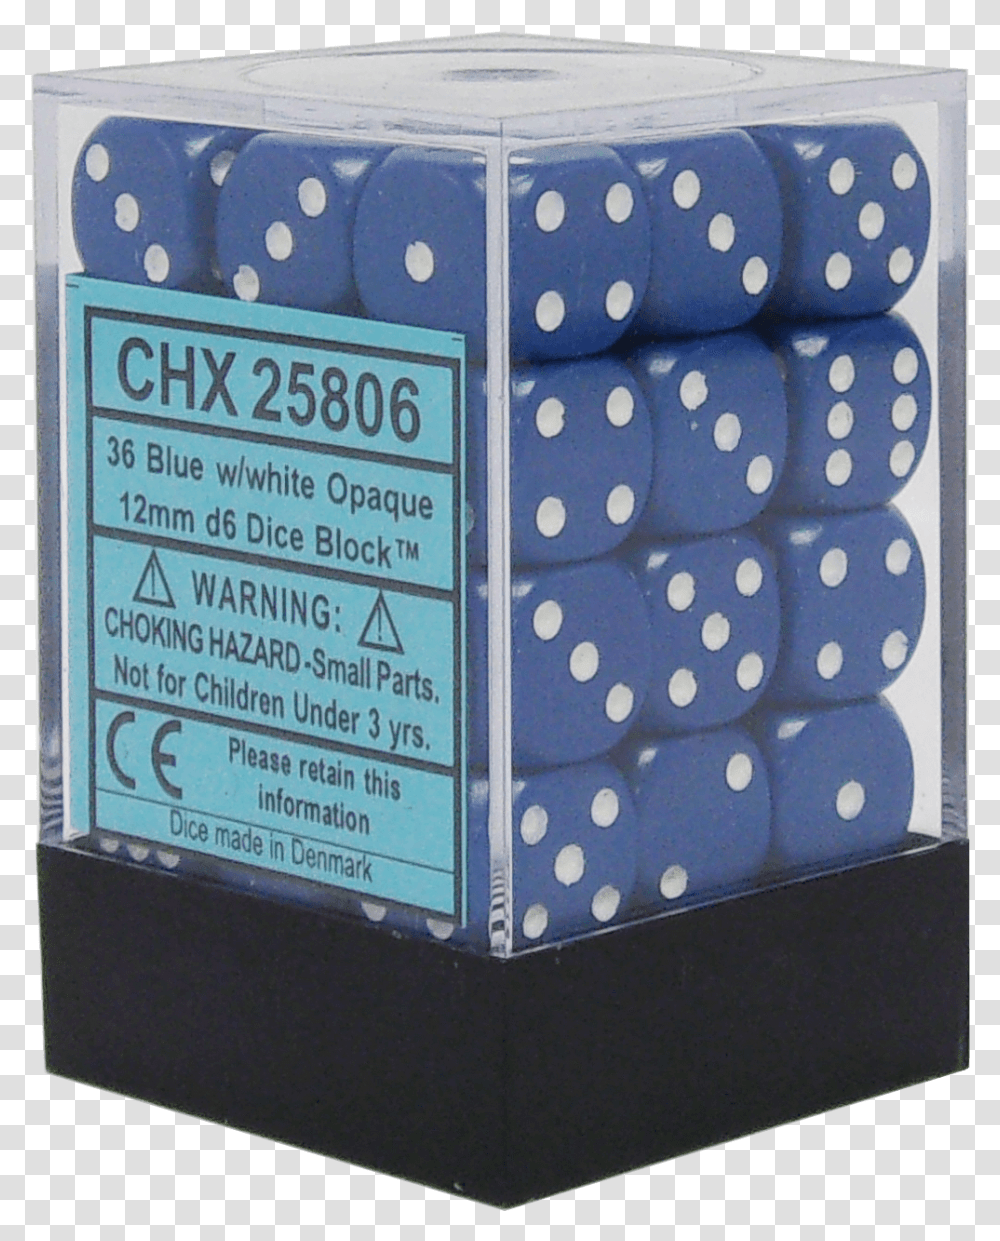 Opaque Blue With White 12mm D6 Chx, Texture, Polka Dot, Label, Box Transparent Png